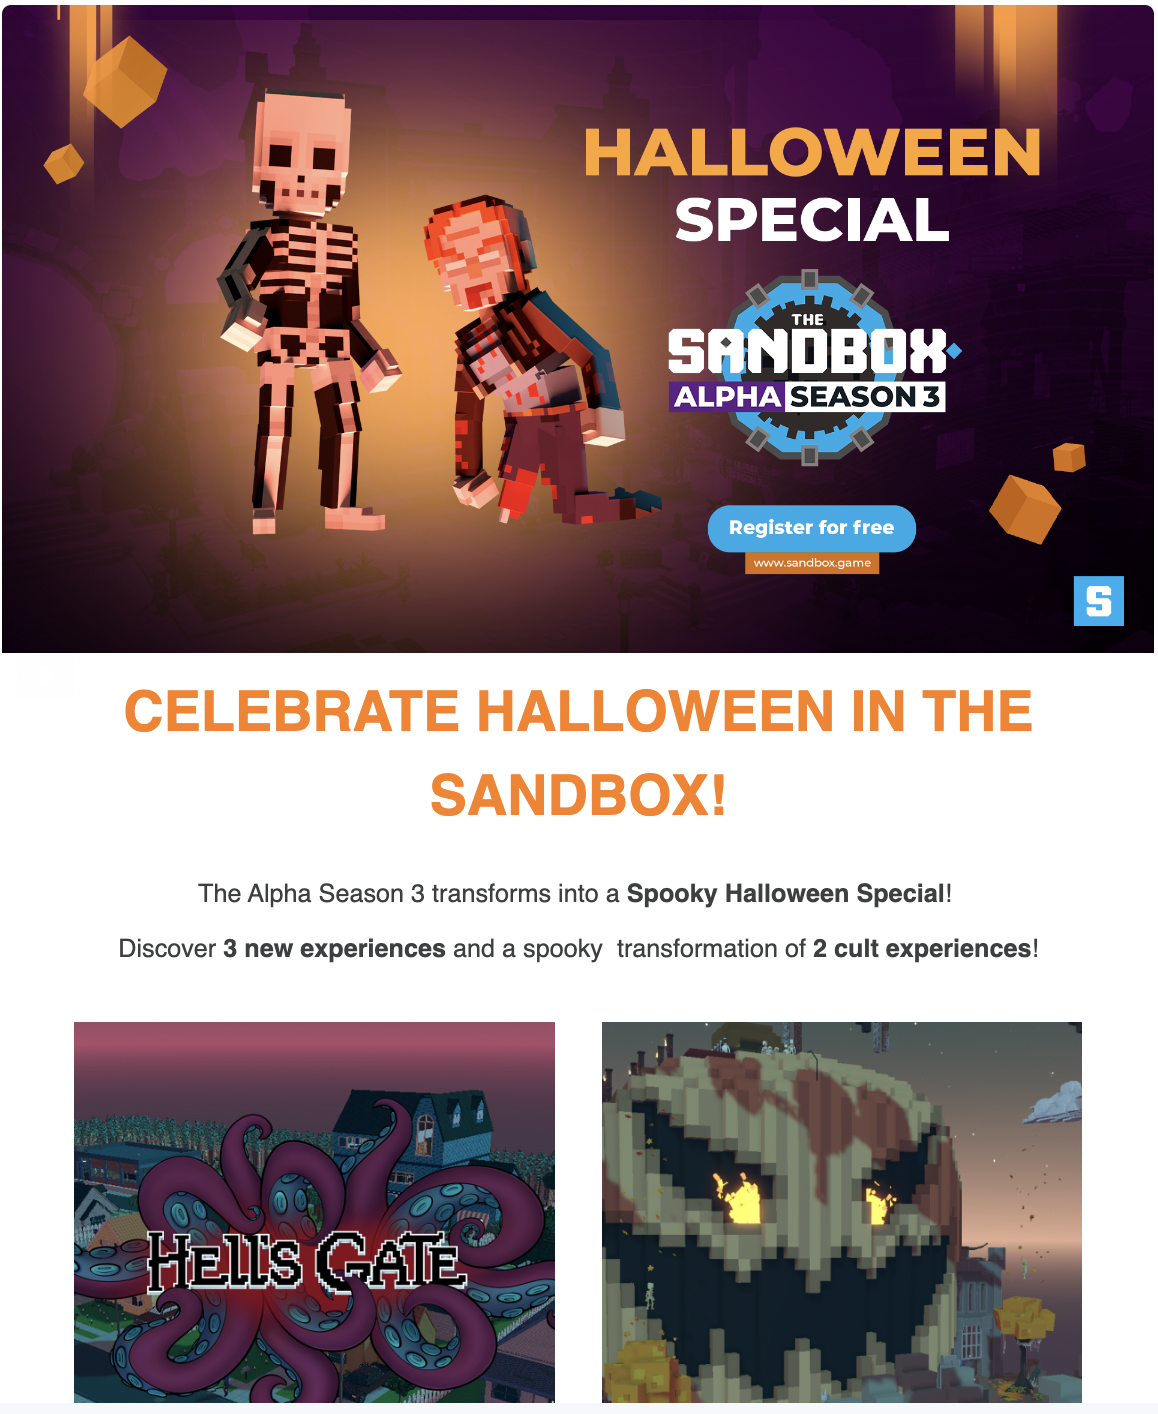 Seasonal email marketing campaign example from Sandbox